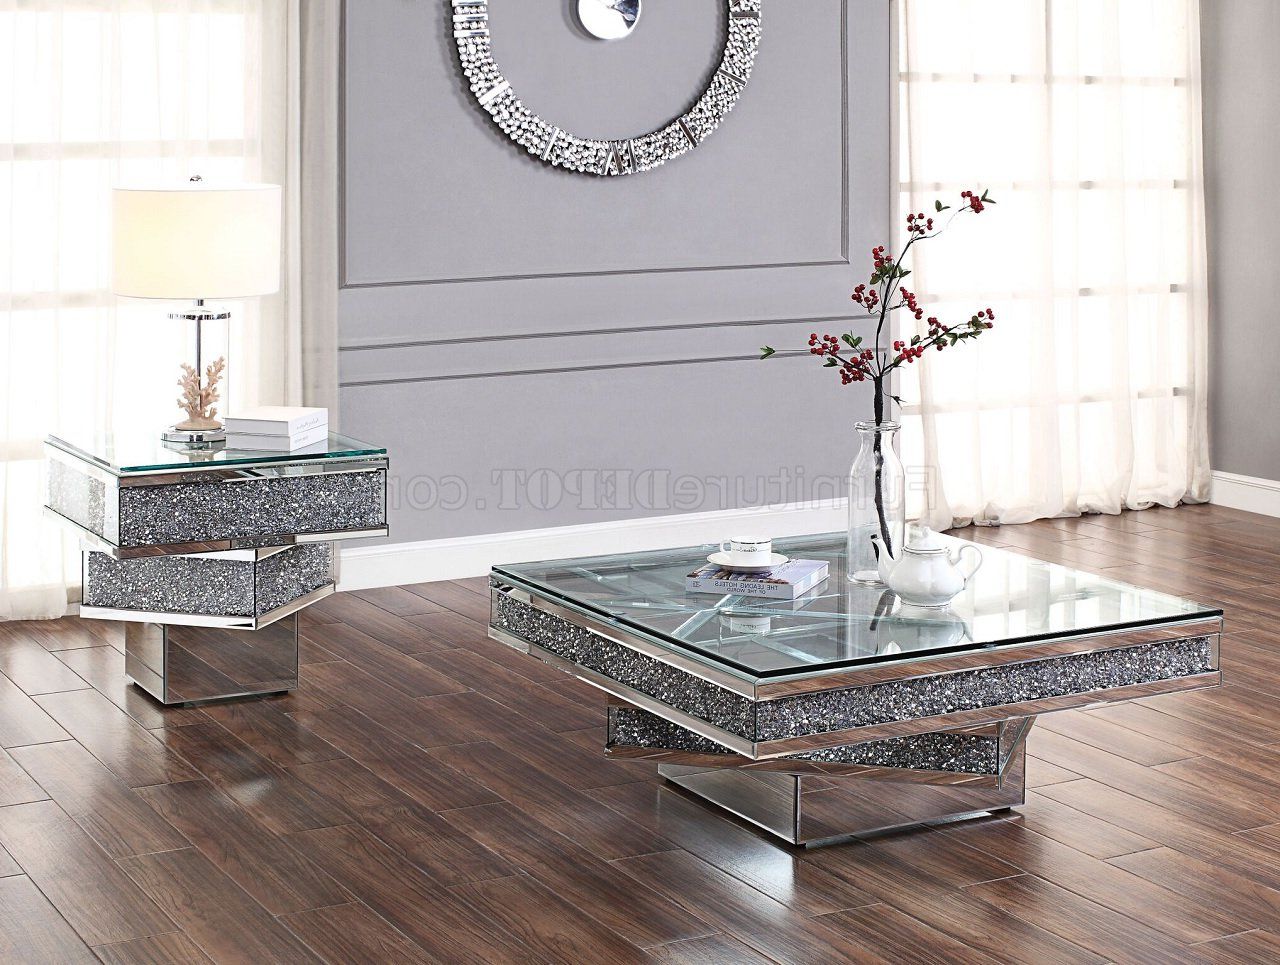 Most Recent Mirrored Modern Coffee Tables Inside Noralie Coffee Table 81465 In Mirroracme W/options (View 12 of 20)